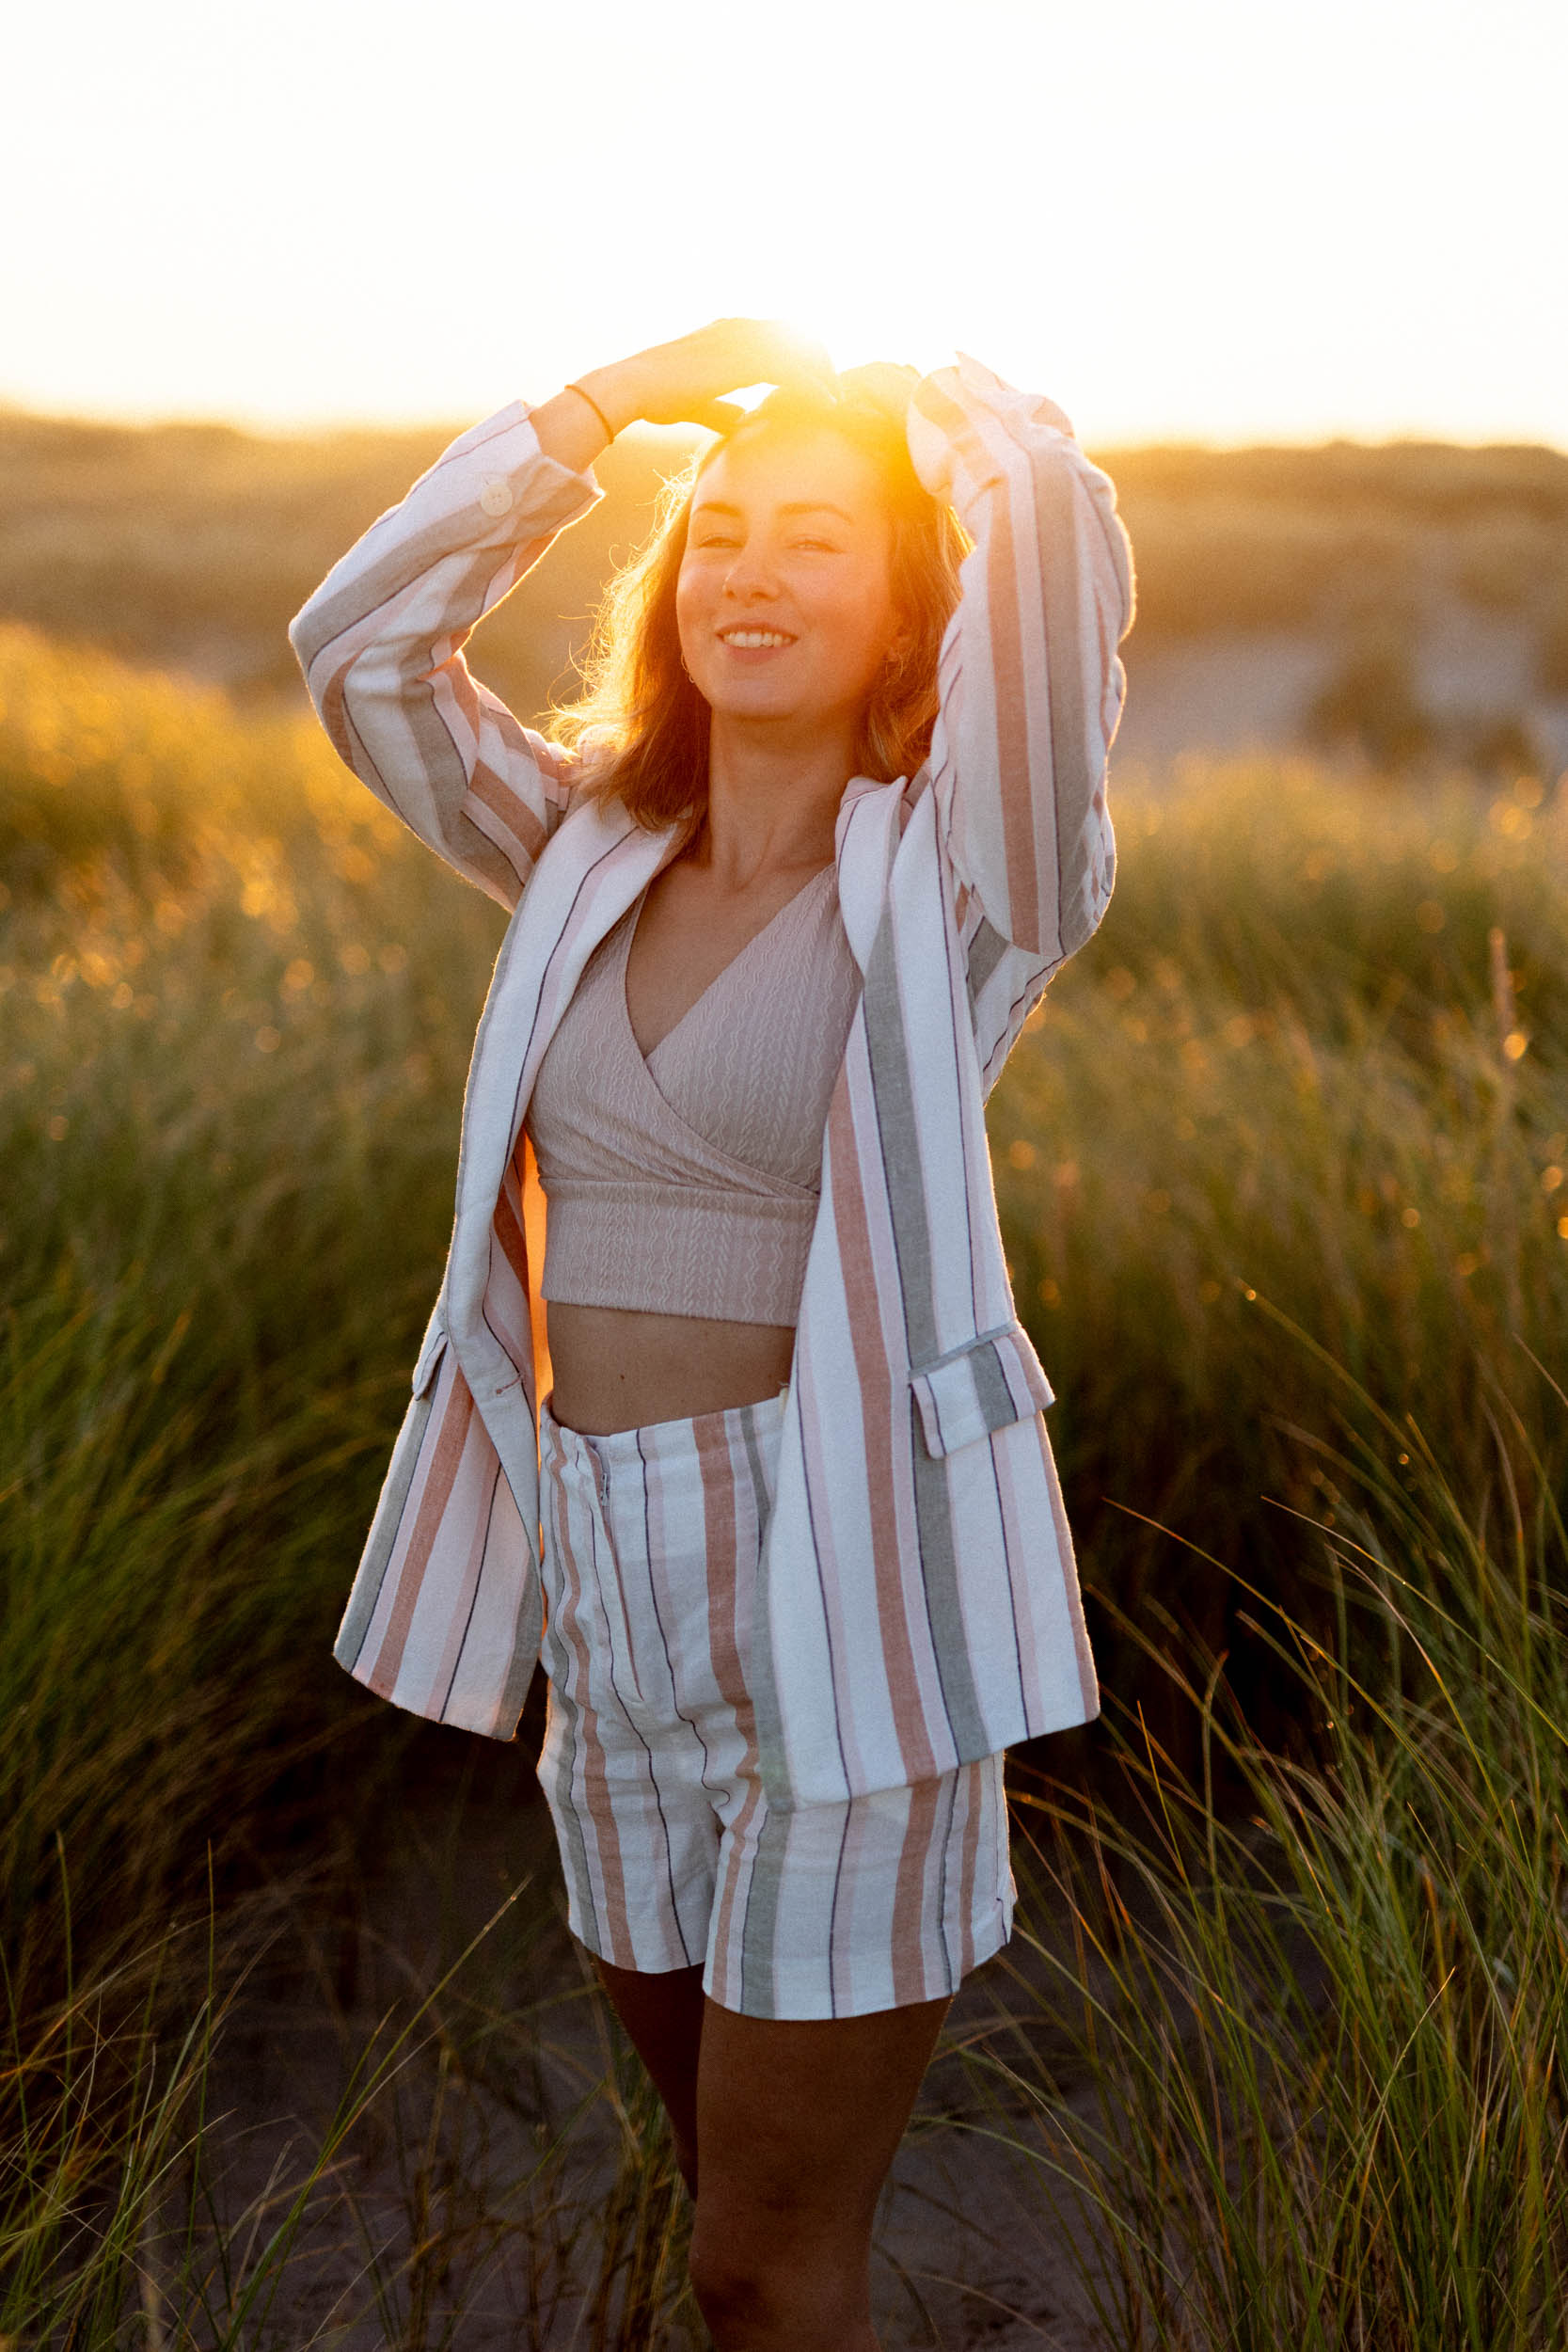 A woman in a striped blazer poses for beach photos in tall grass at sunset.